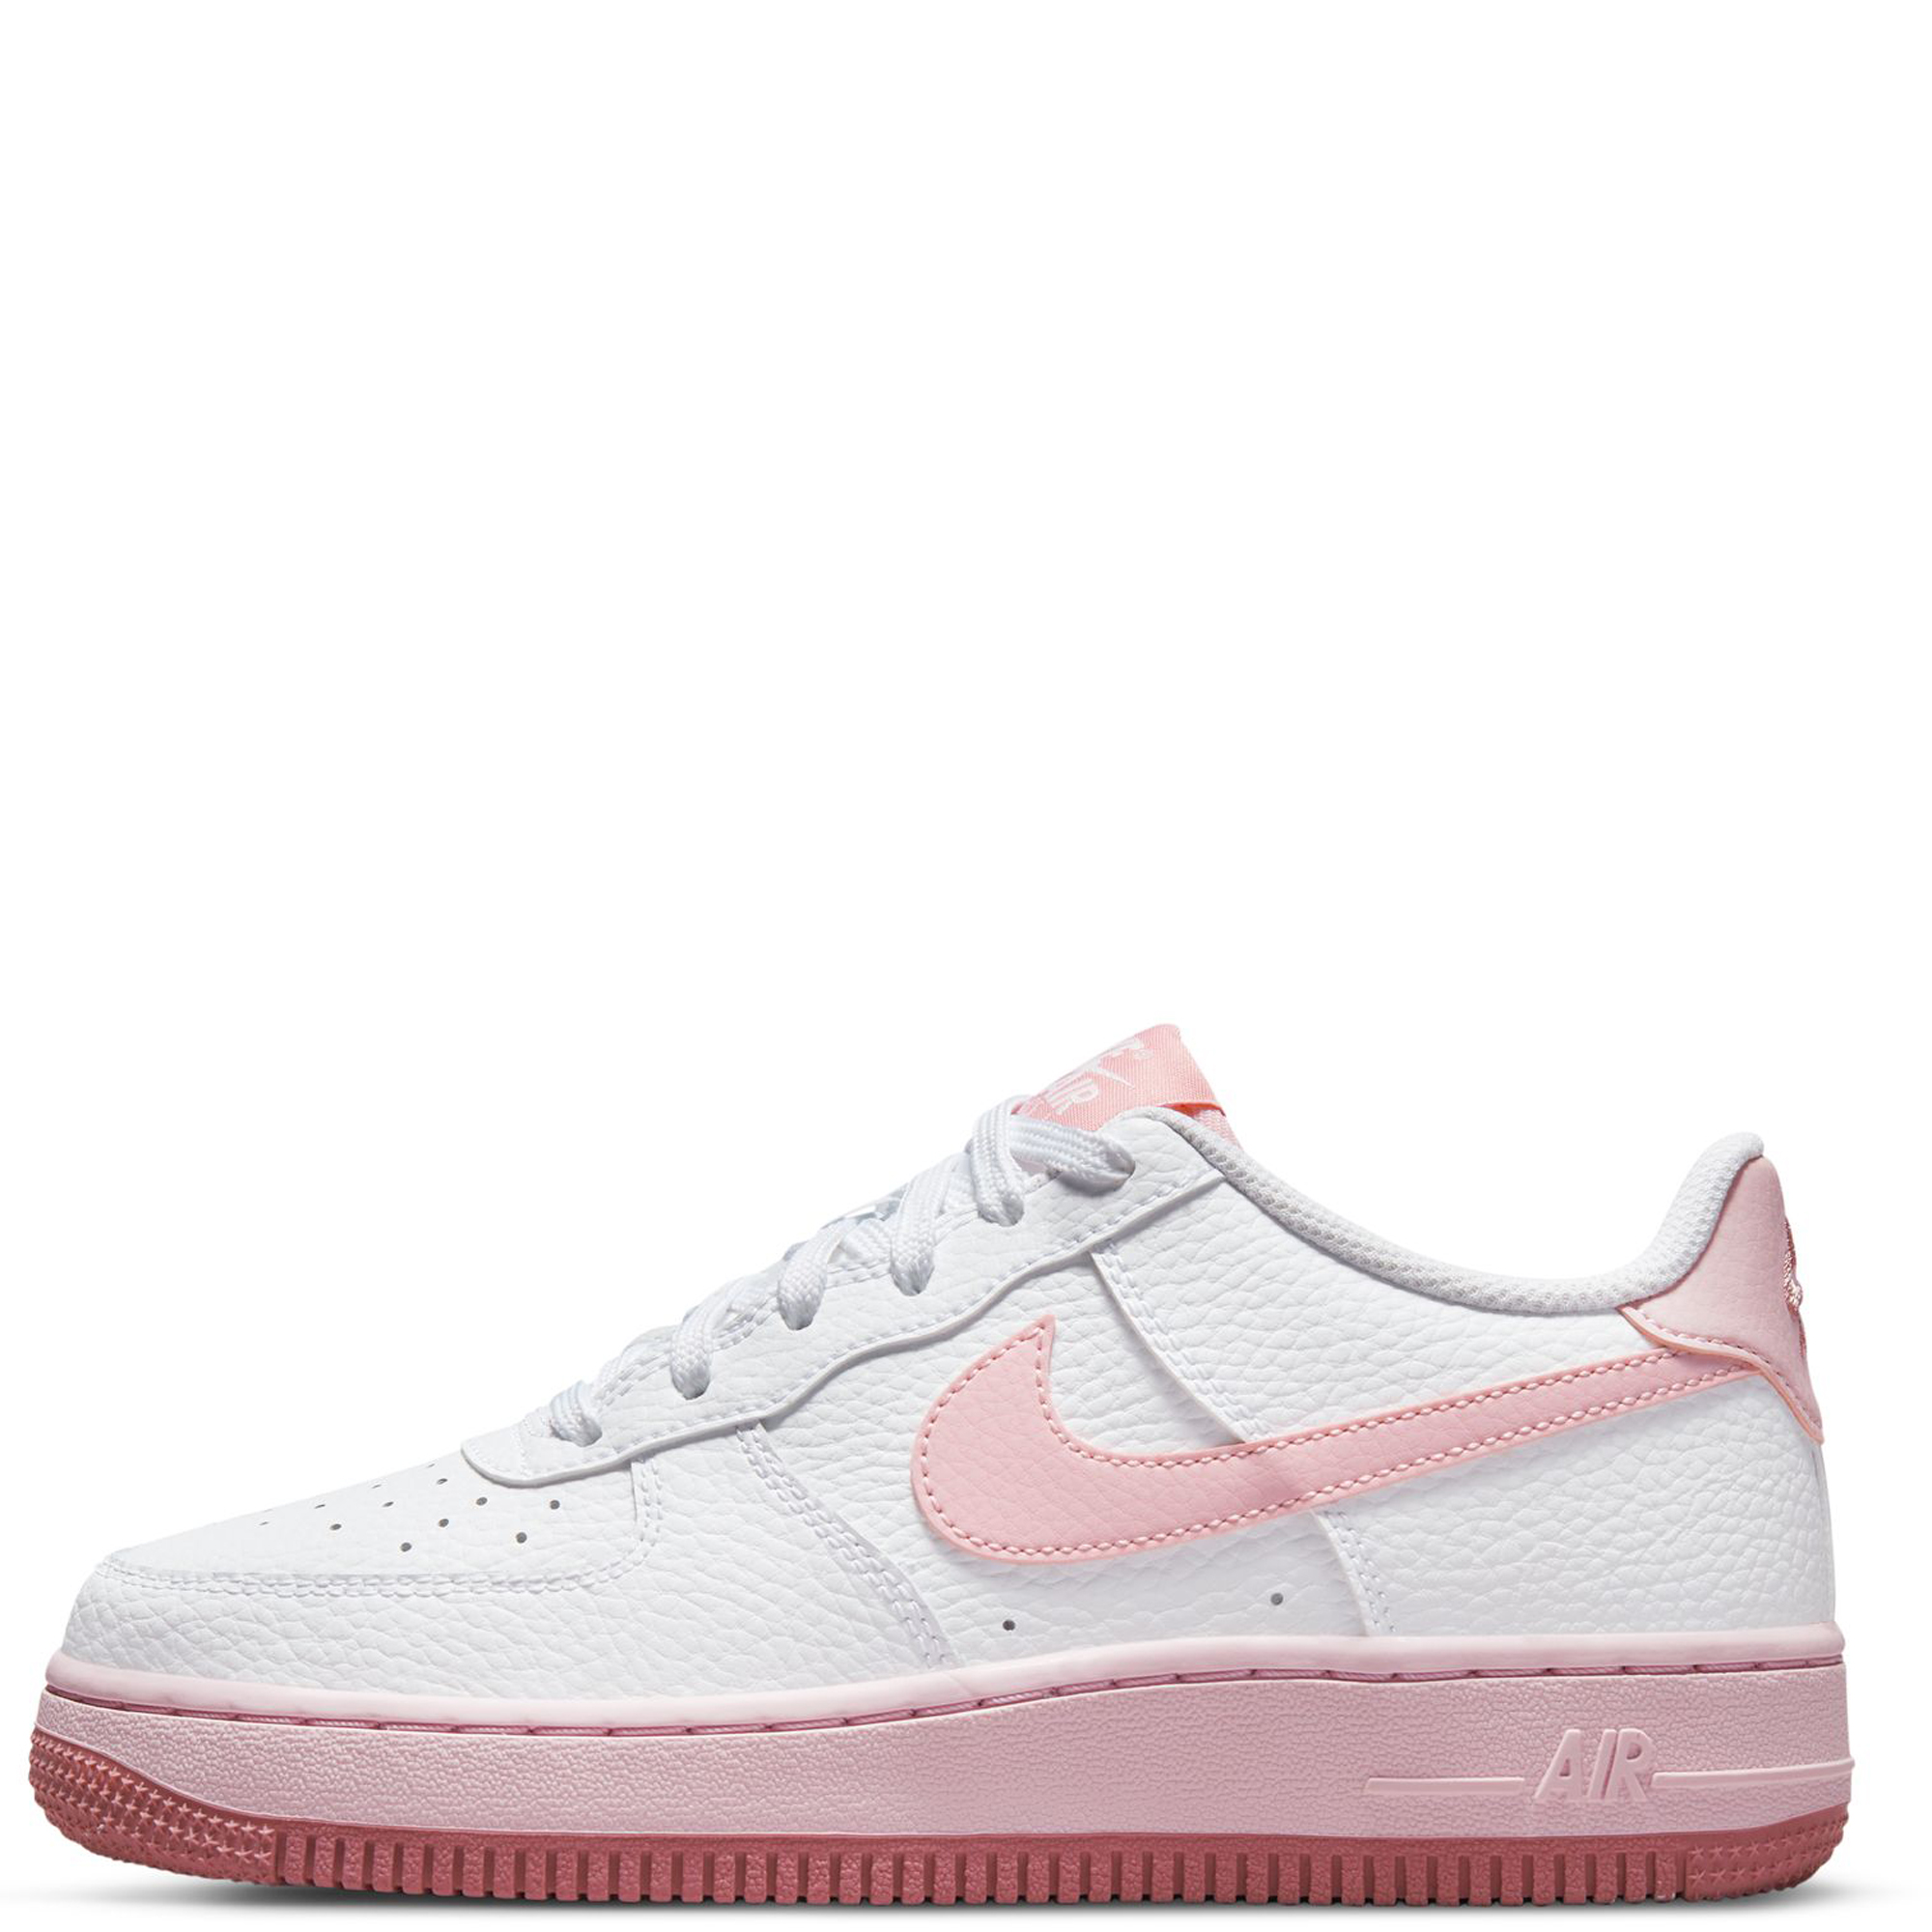 Nike Air Force 1 LV8 2 Low Have a Nike Day Pink Foam (GS) ~ Pink Foam ~  Size 7Y